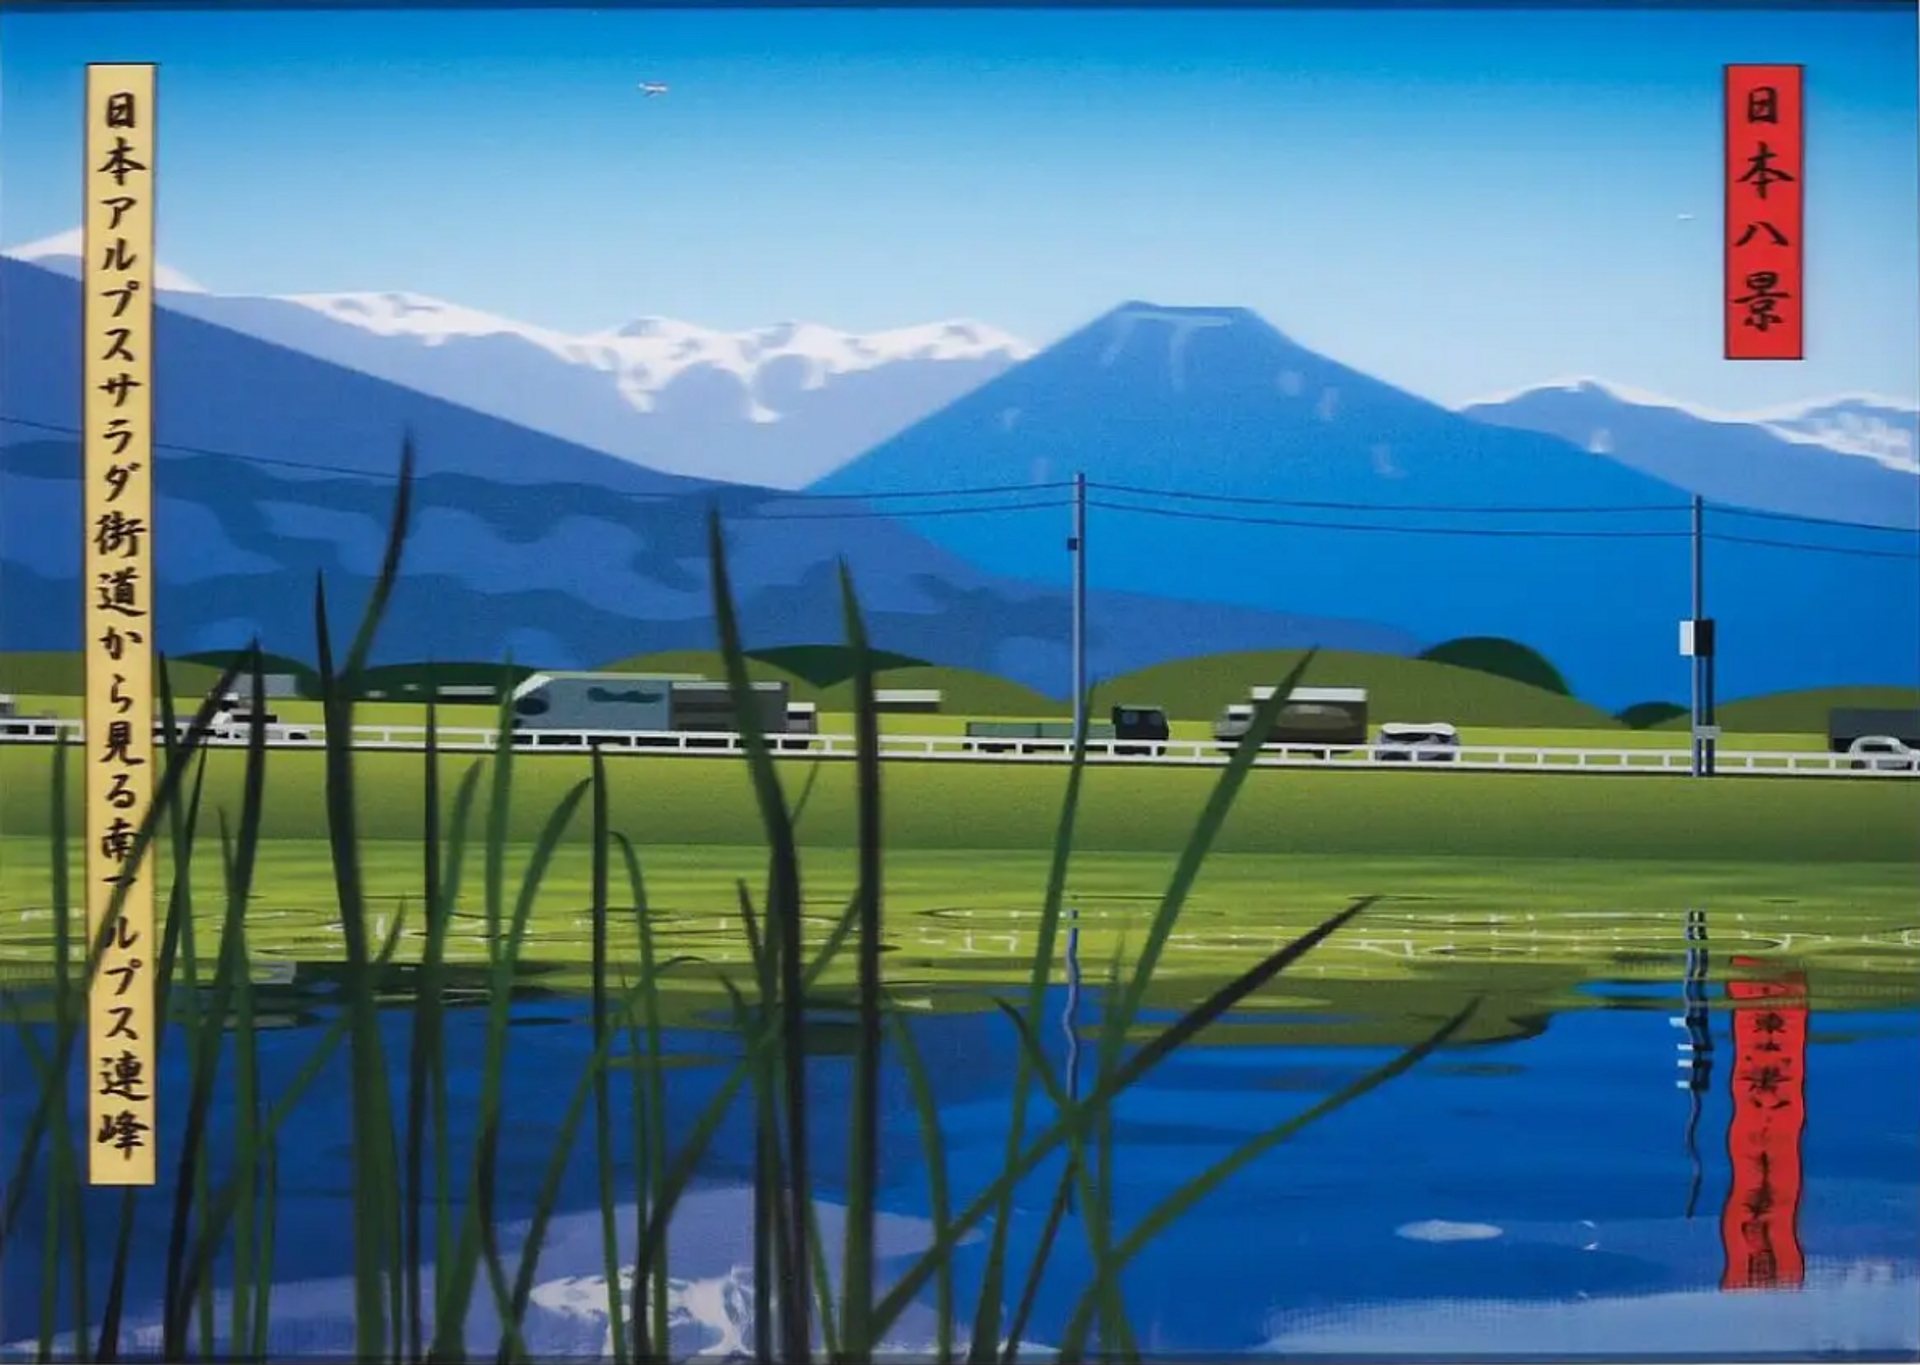 View of the Mountains from the Nihon Alps Salada Road by Julian Opie